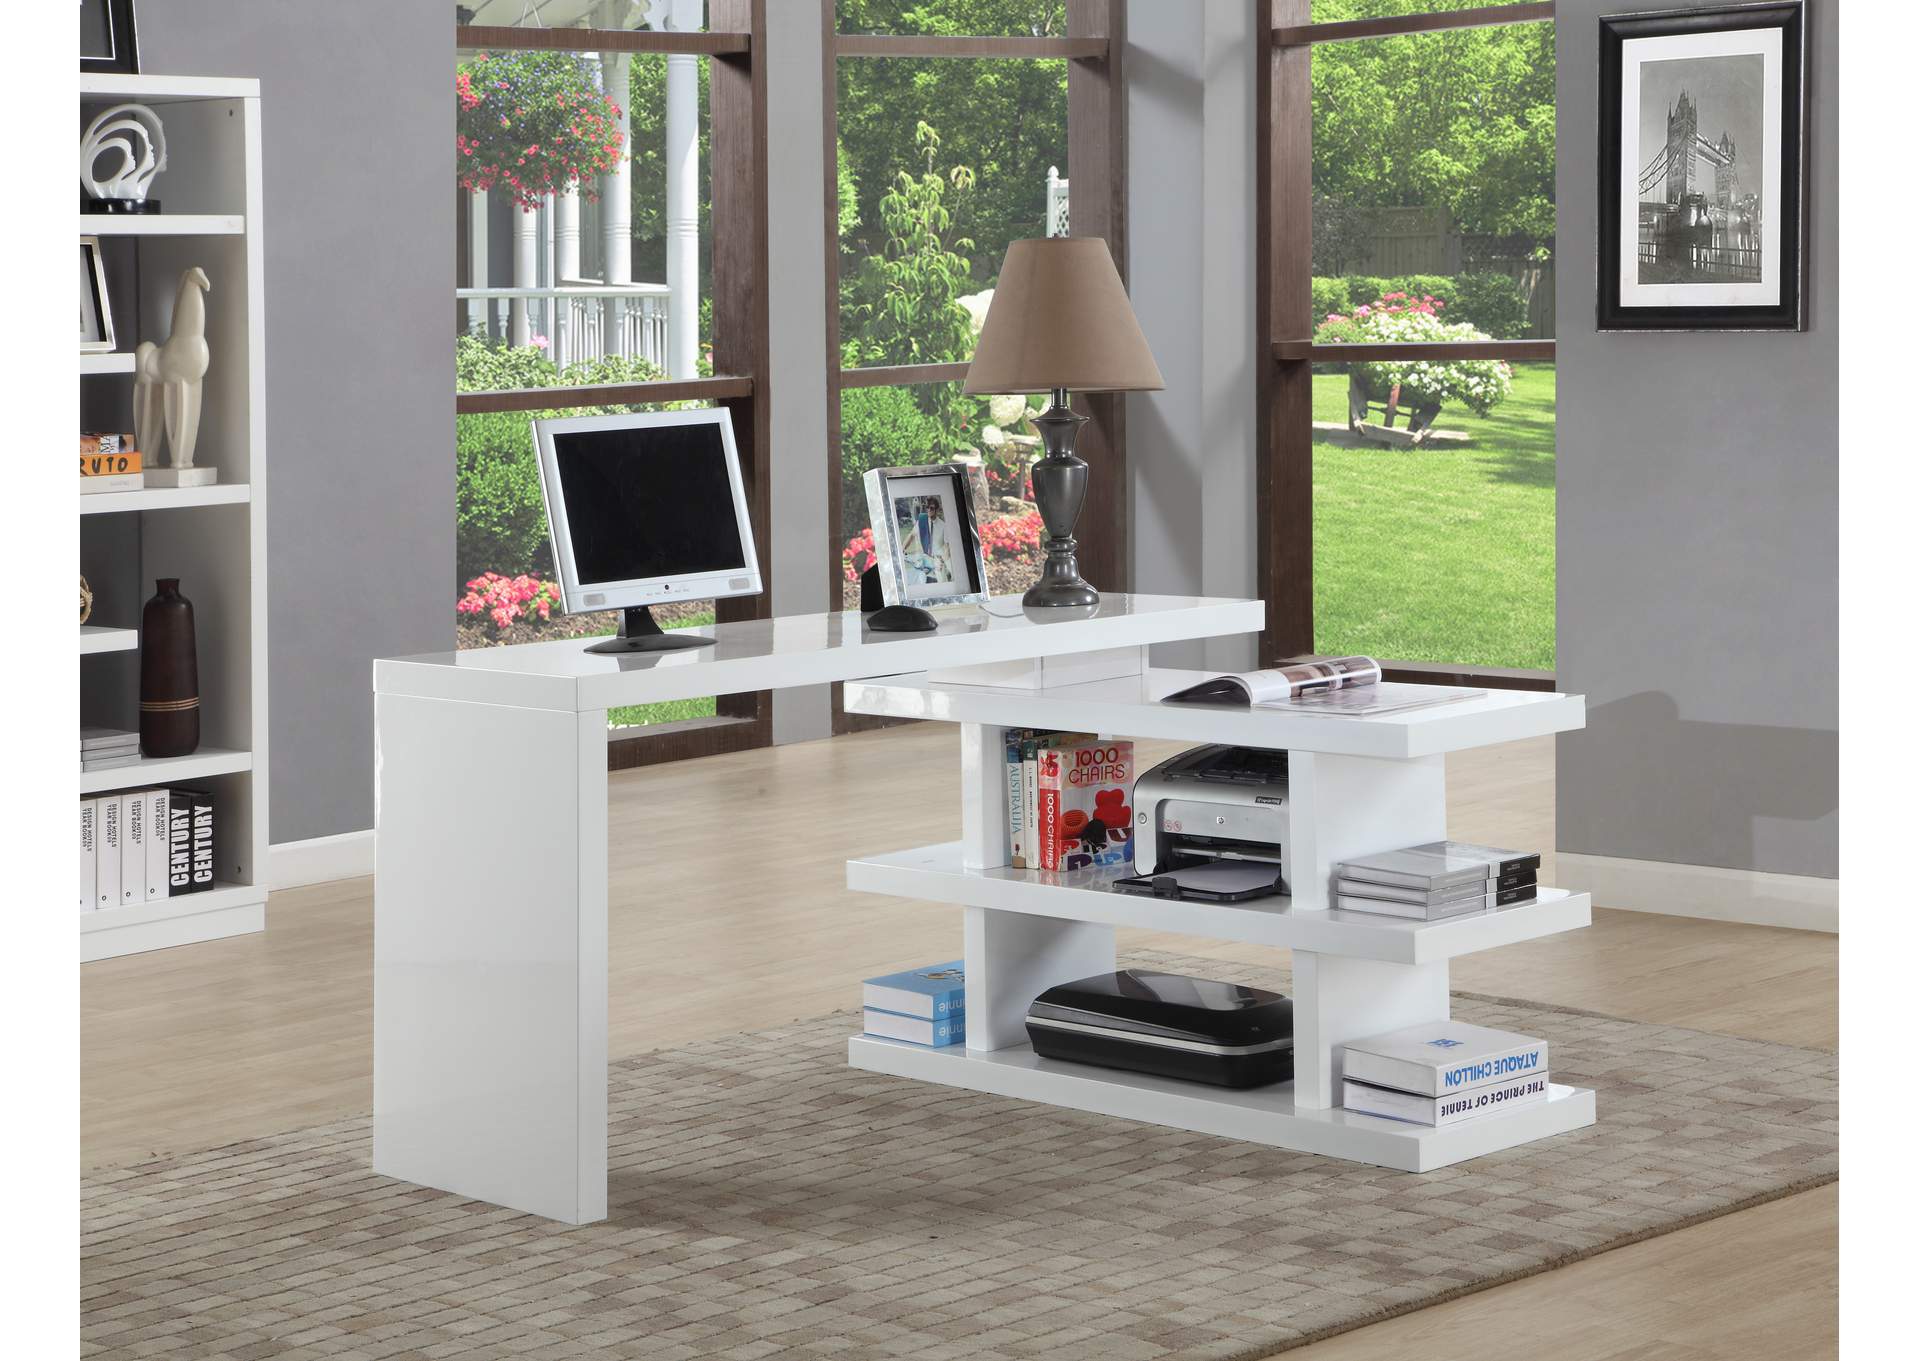 Motion Home Office Desk w/ Shelves,Chintaly Imports